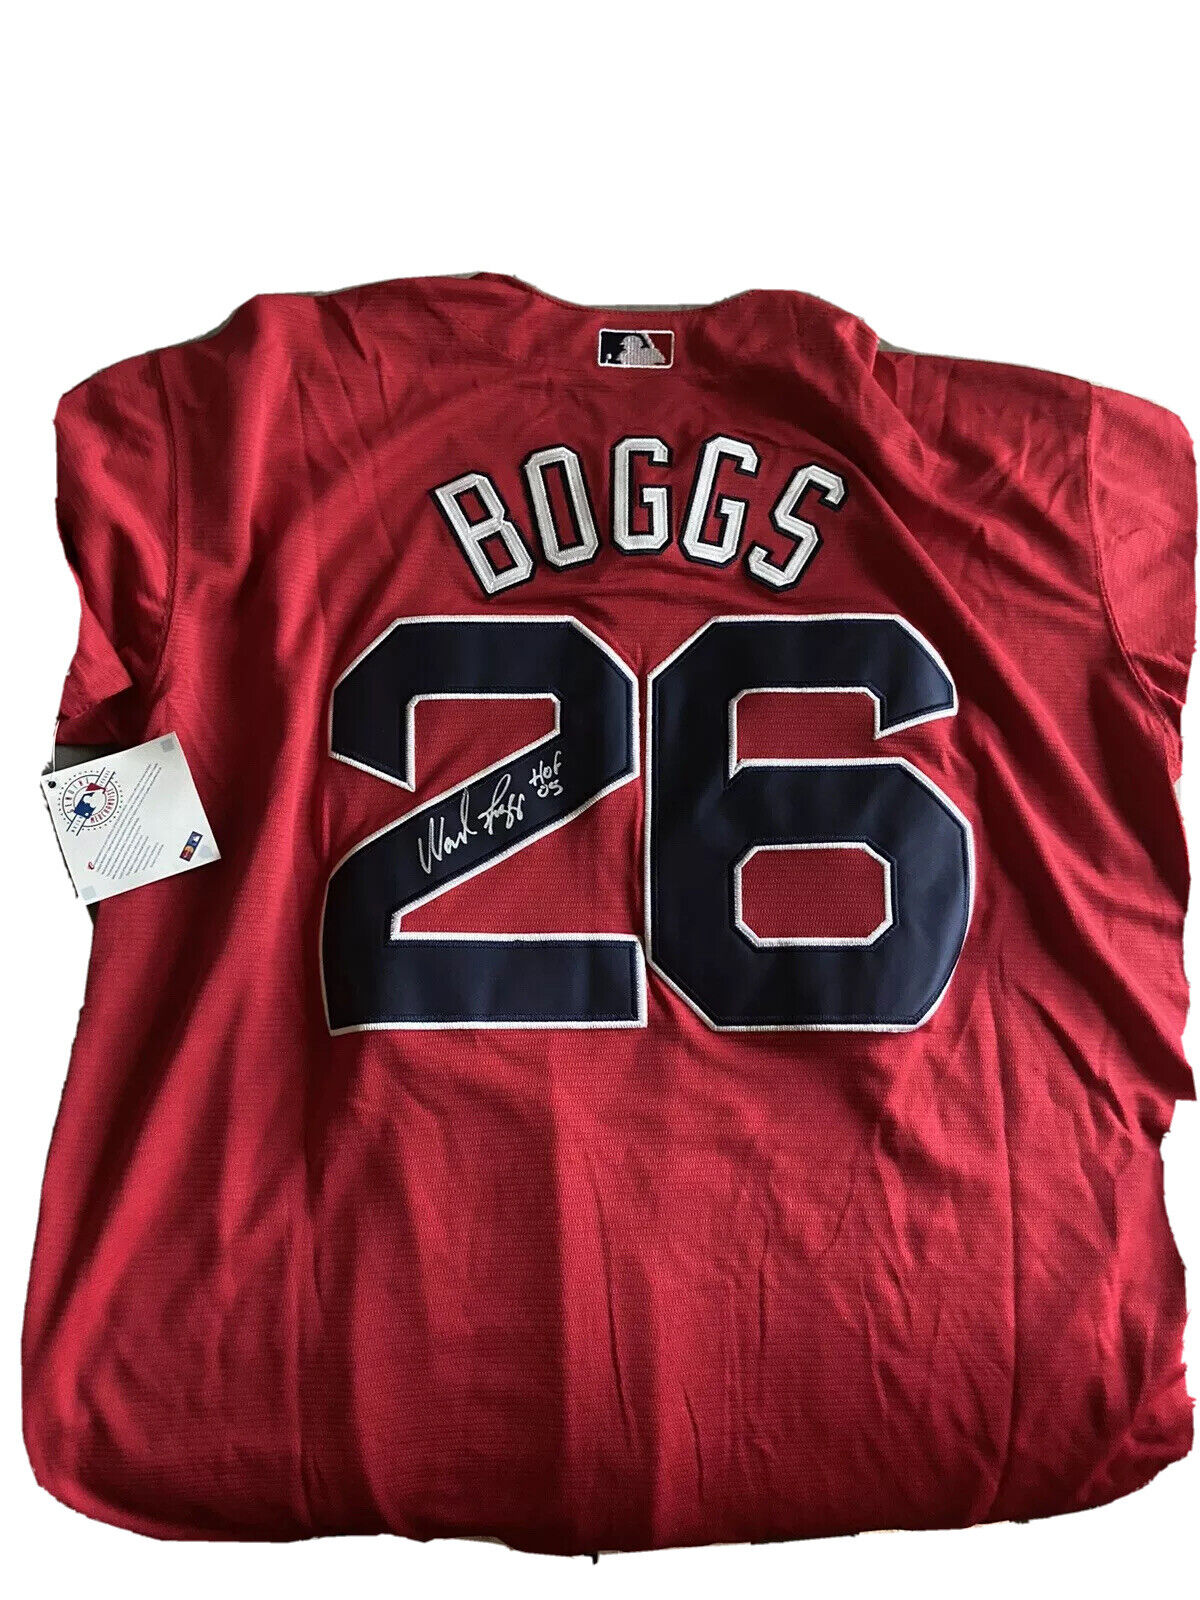 Wade Boggs Signed Autograph Boston Red Sox Jersey With HOF 05 Inscription